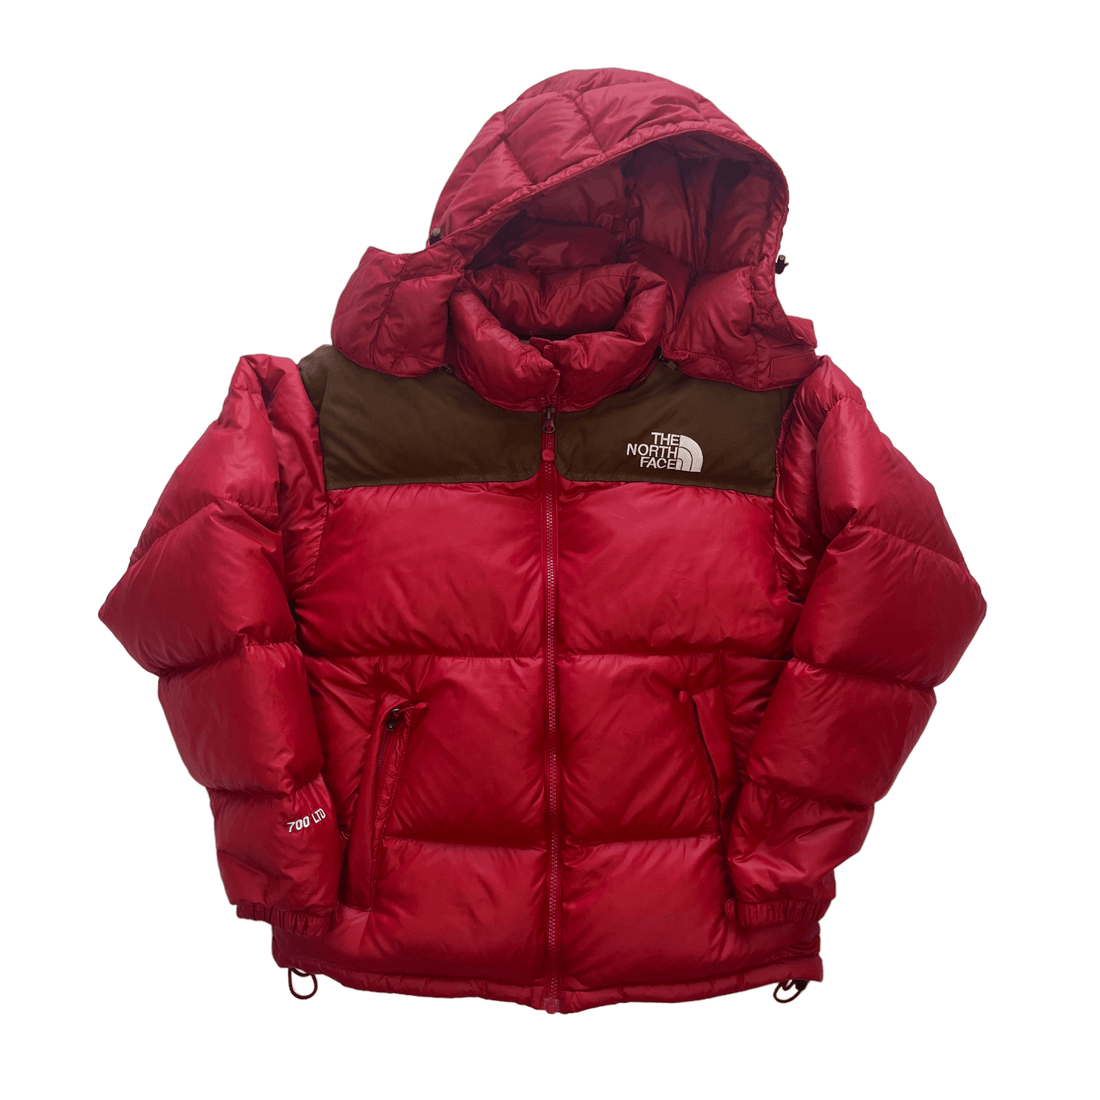 Vintage Red The North Face (TNF) 700 Puffer Coat - Small - The Streetwear Studio